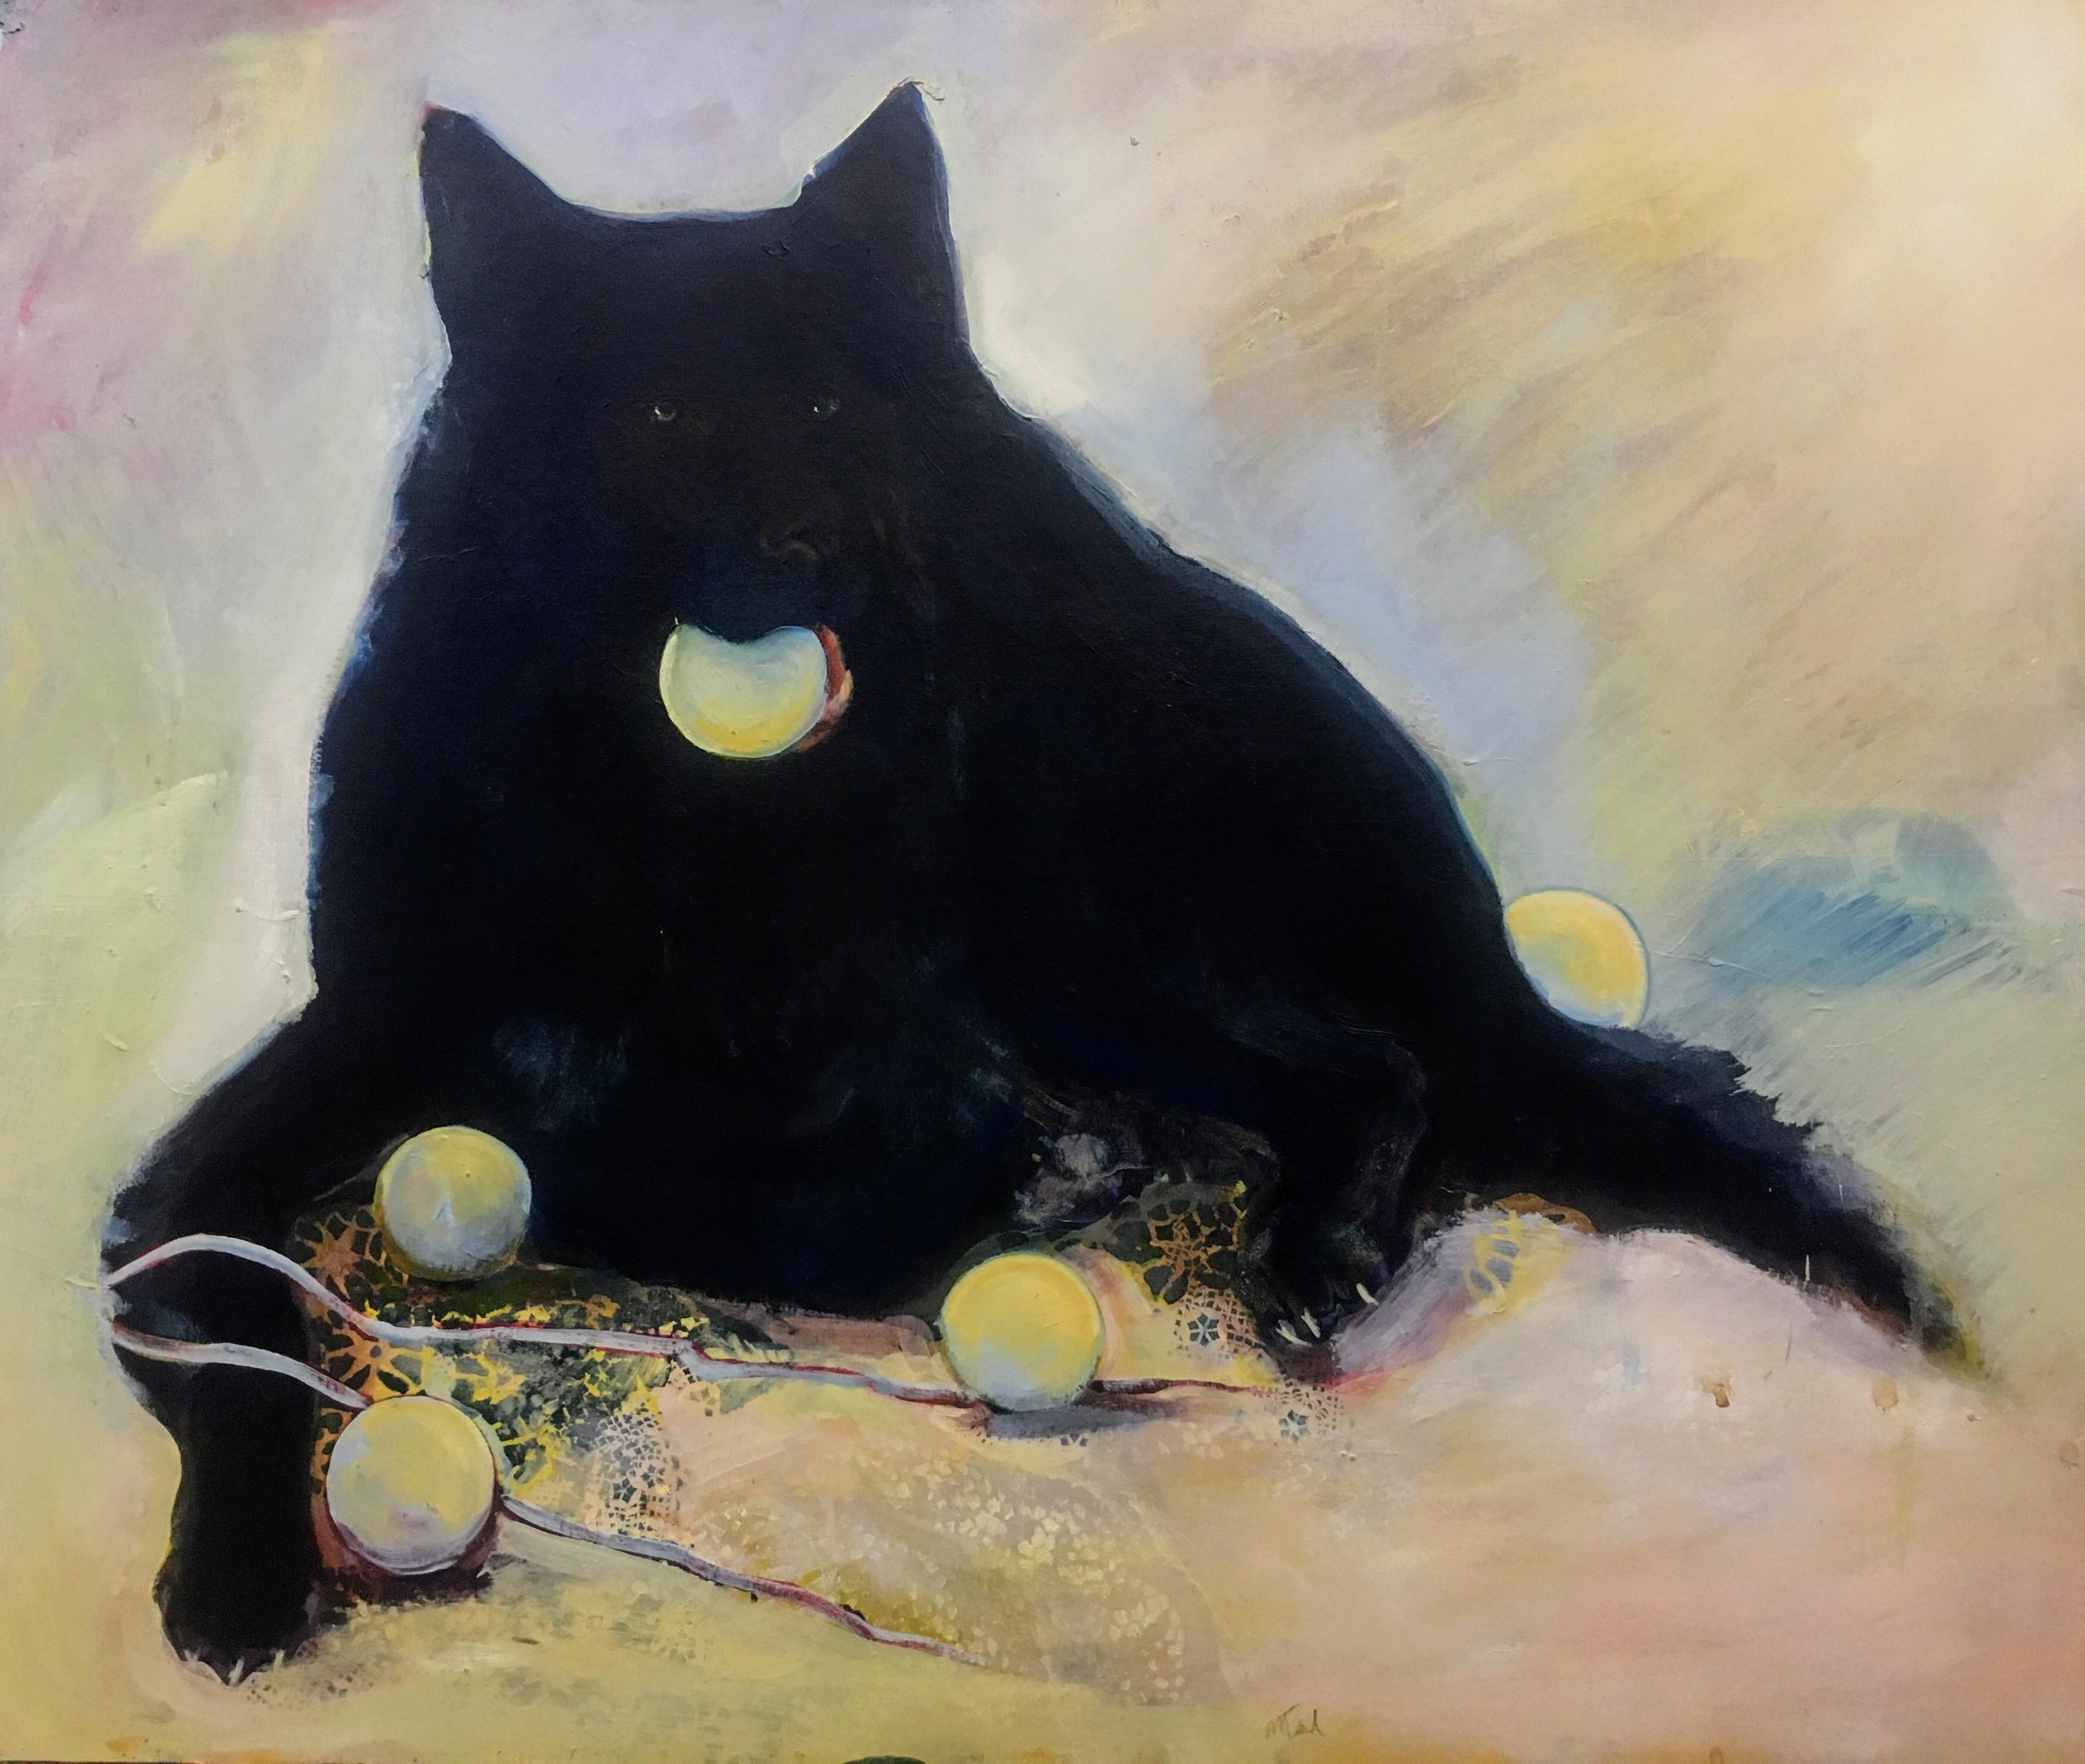 5 Balls (Oil on Primed Paper) - Painting by Monika Teal